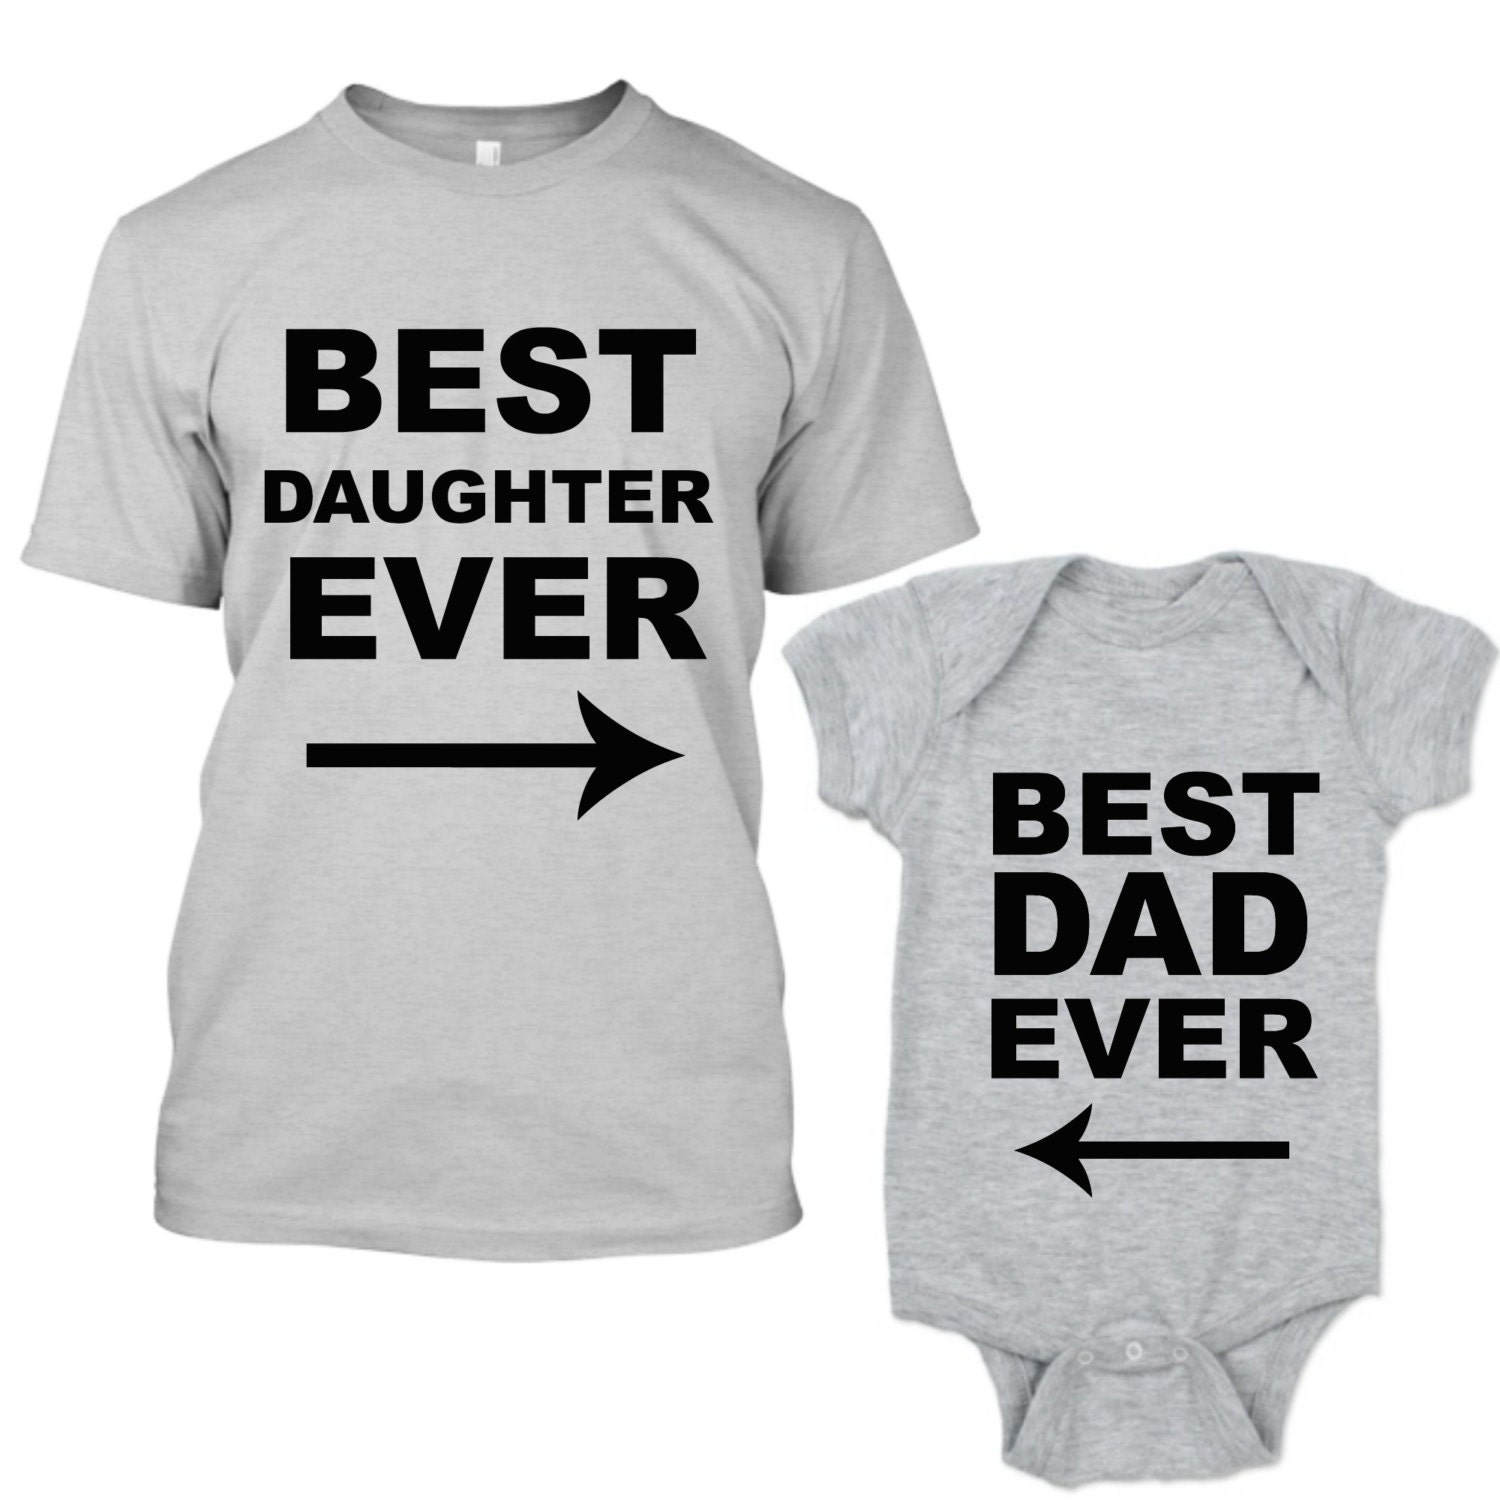 Father Daughter Matching Shirts Daddy and Daughter Shirts